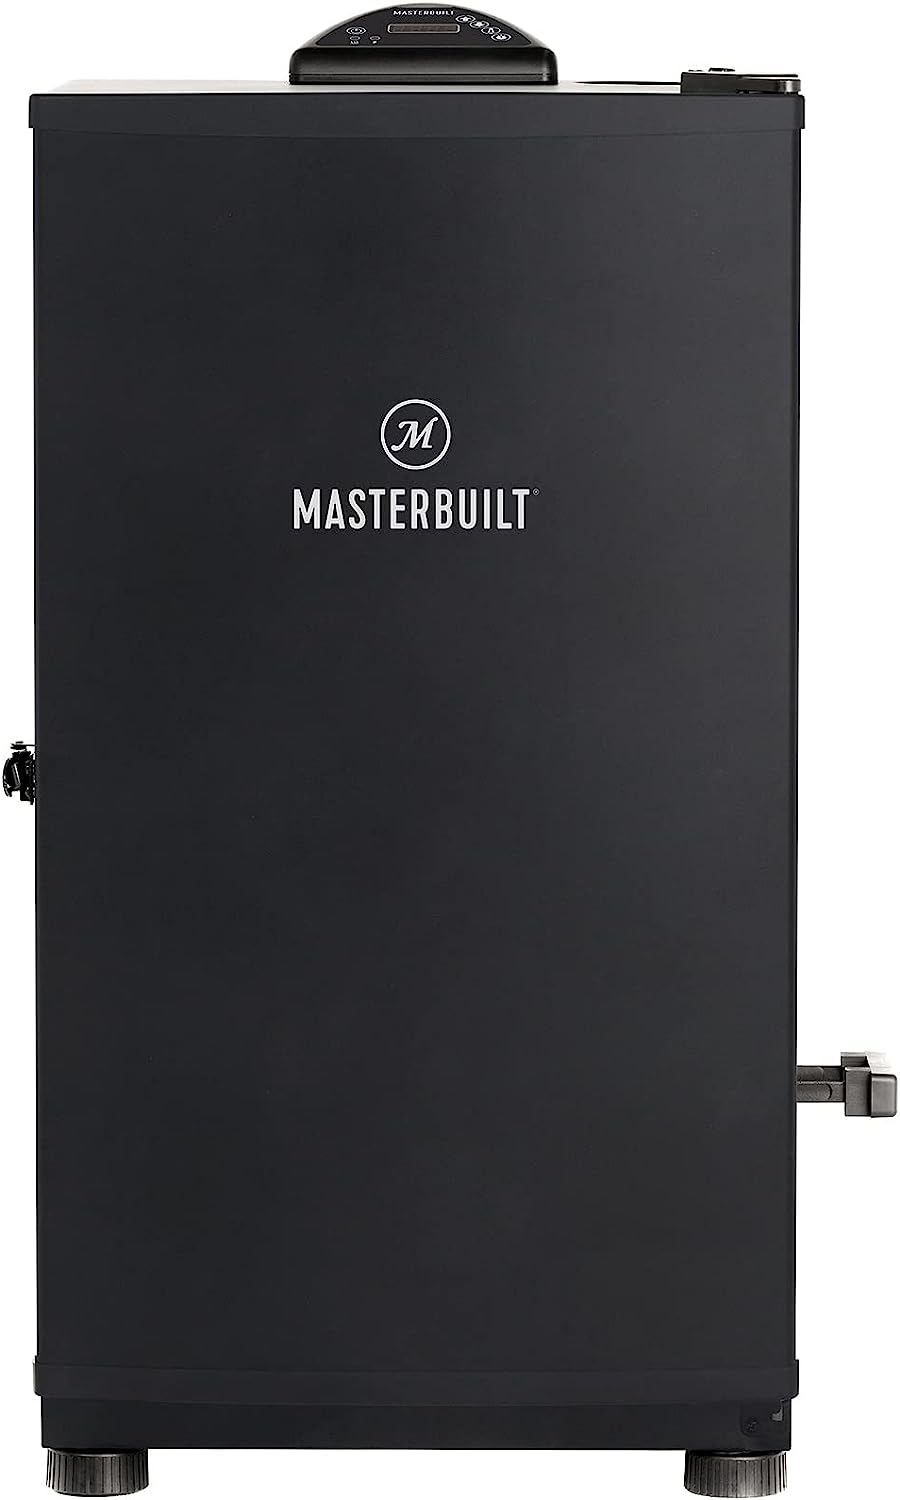 You are currently viewing Masterbuilt MB20071117 Digital Electric Smoker